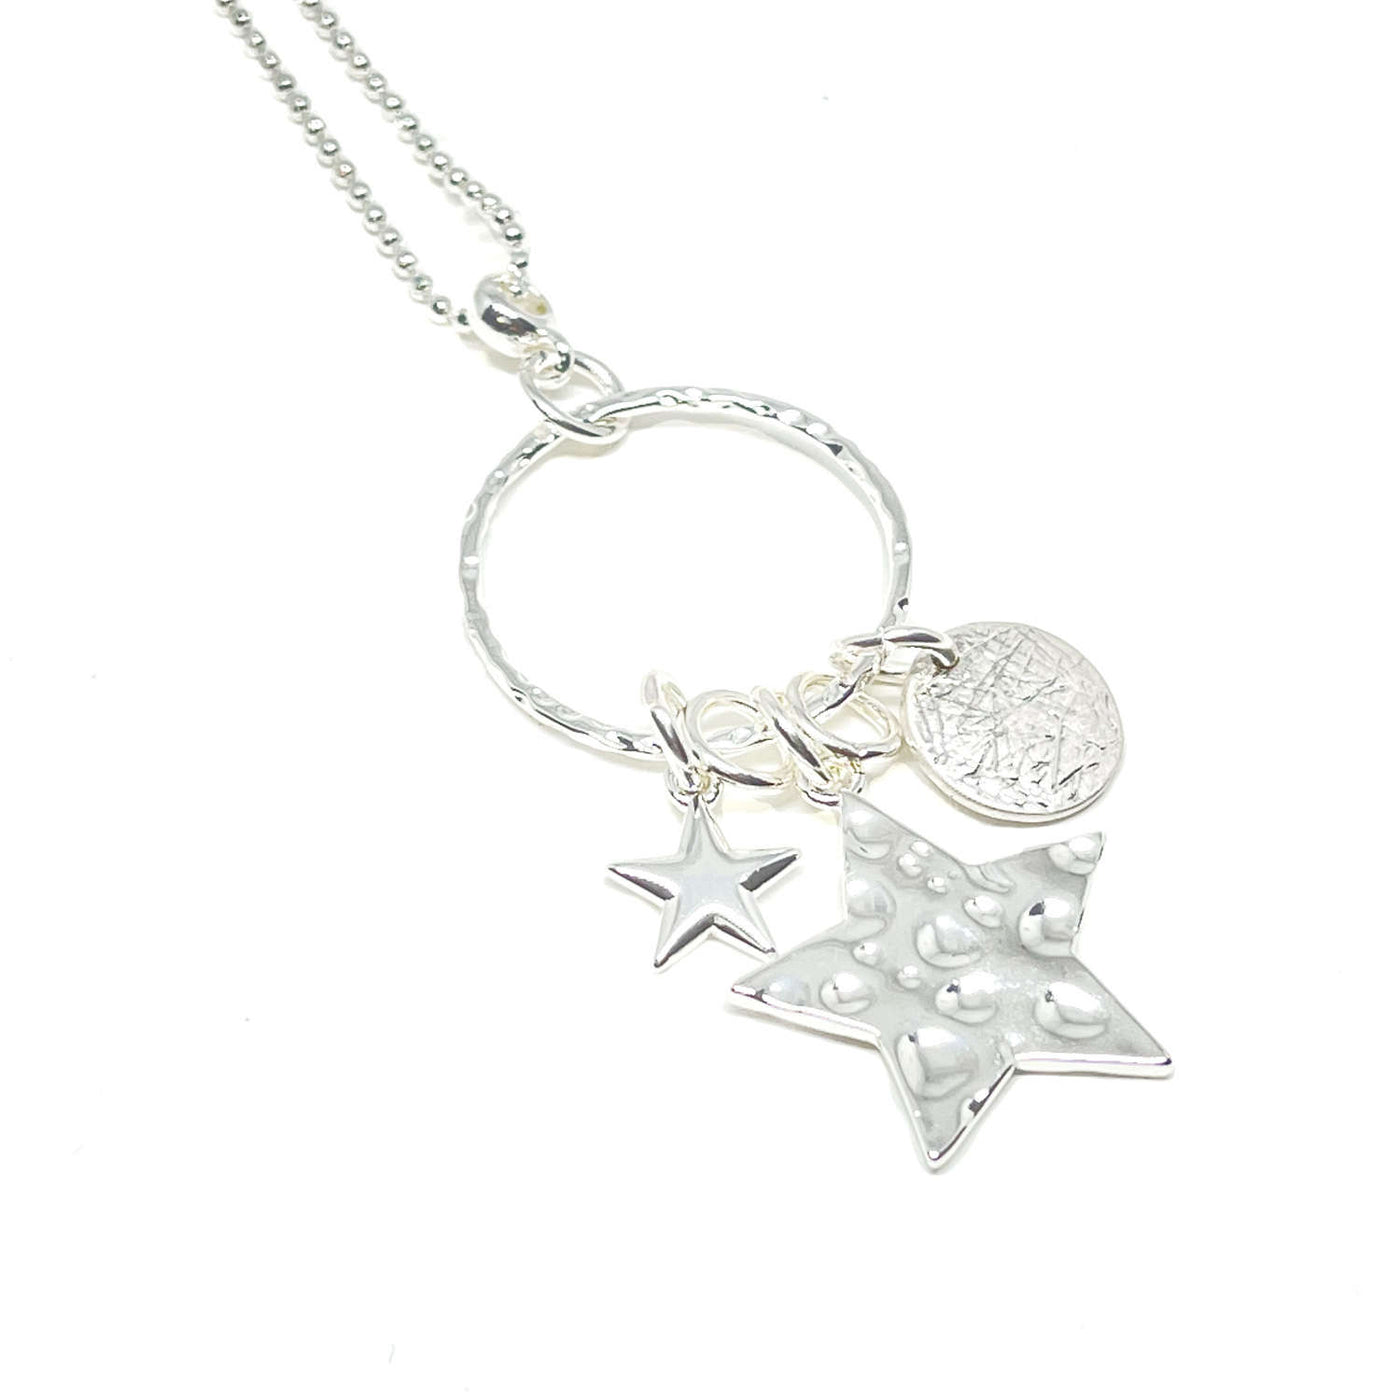 Joanna Star & Disc Charm Long Necklace - Silver - Clementine Jewellery